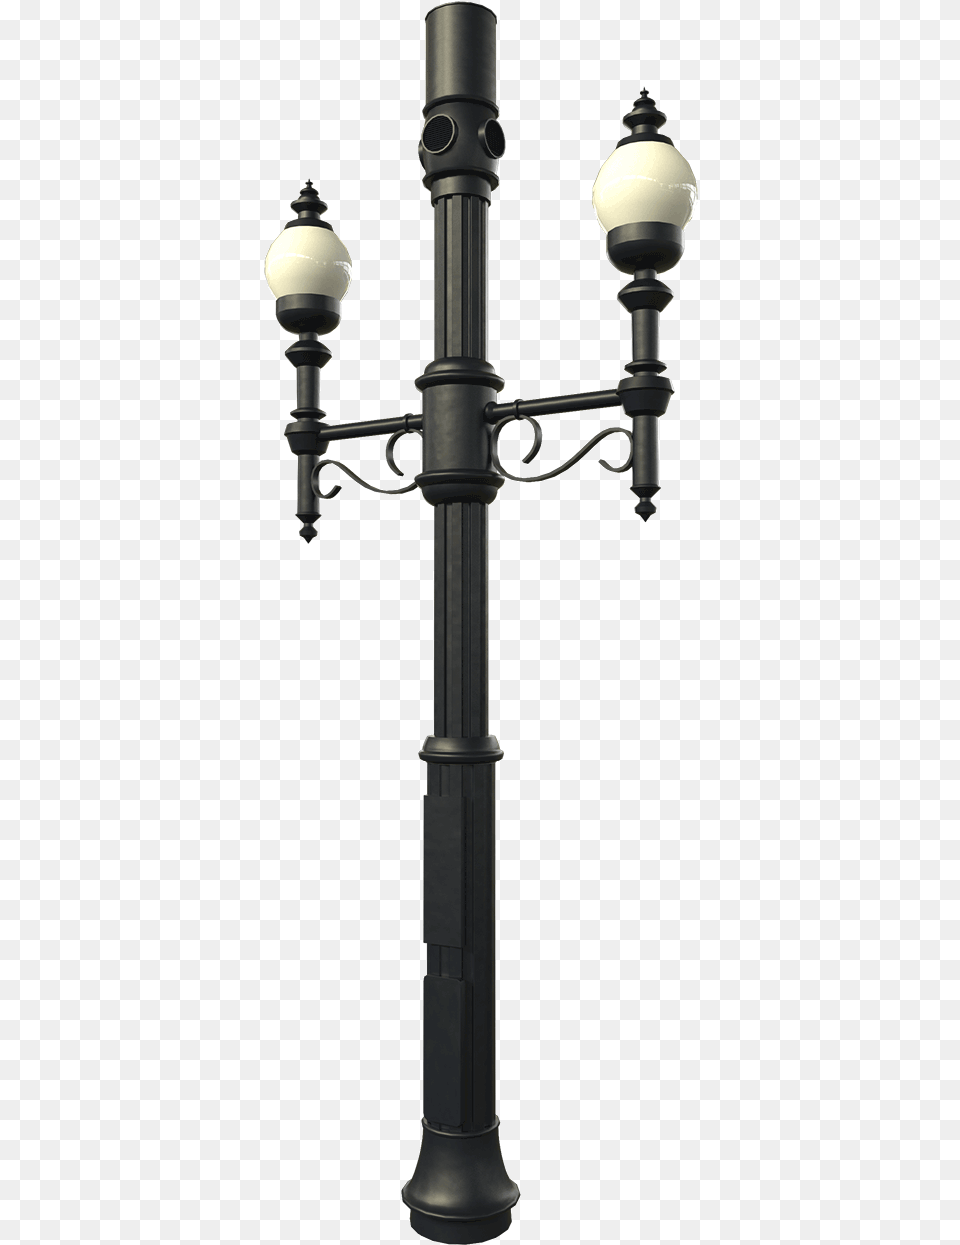 Nepsa Solutions By Proving 3d Renders Of Their Product, Lamp, Lamp Post, Chandelier Png